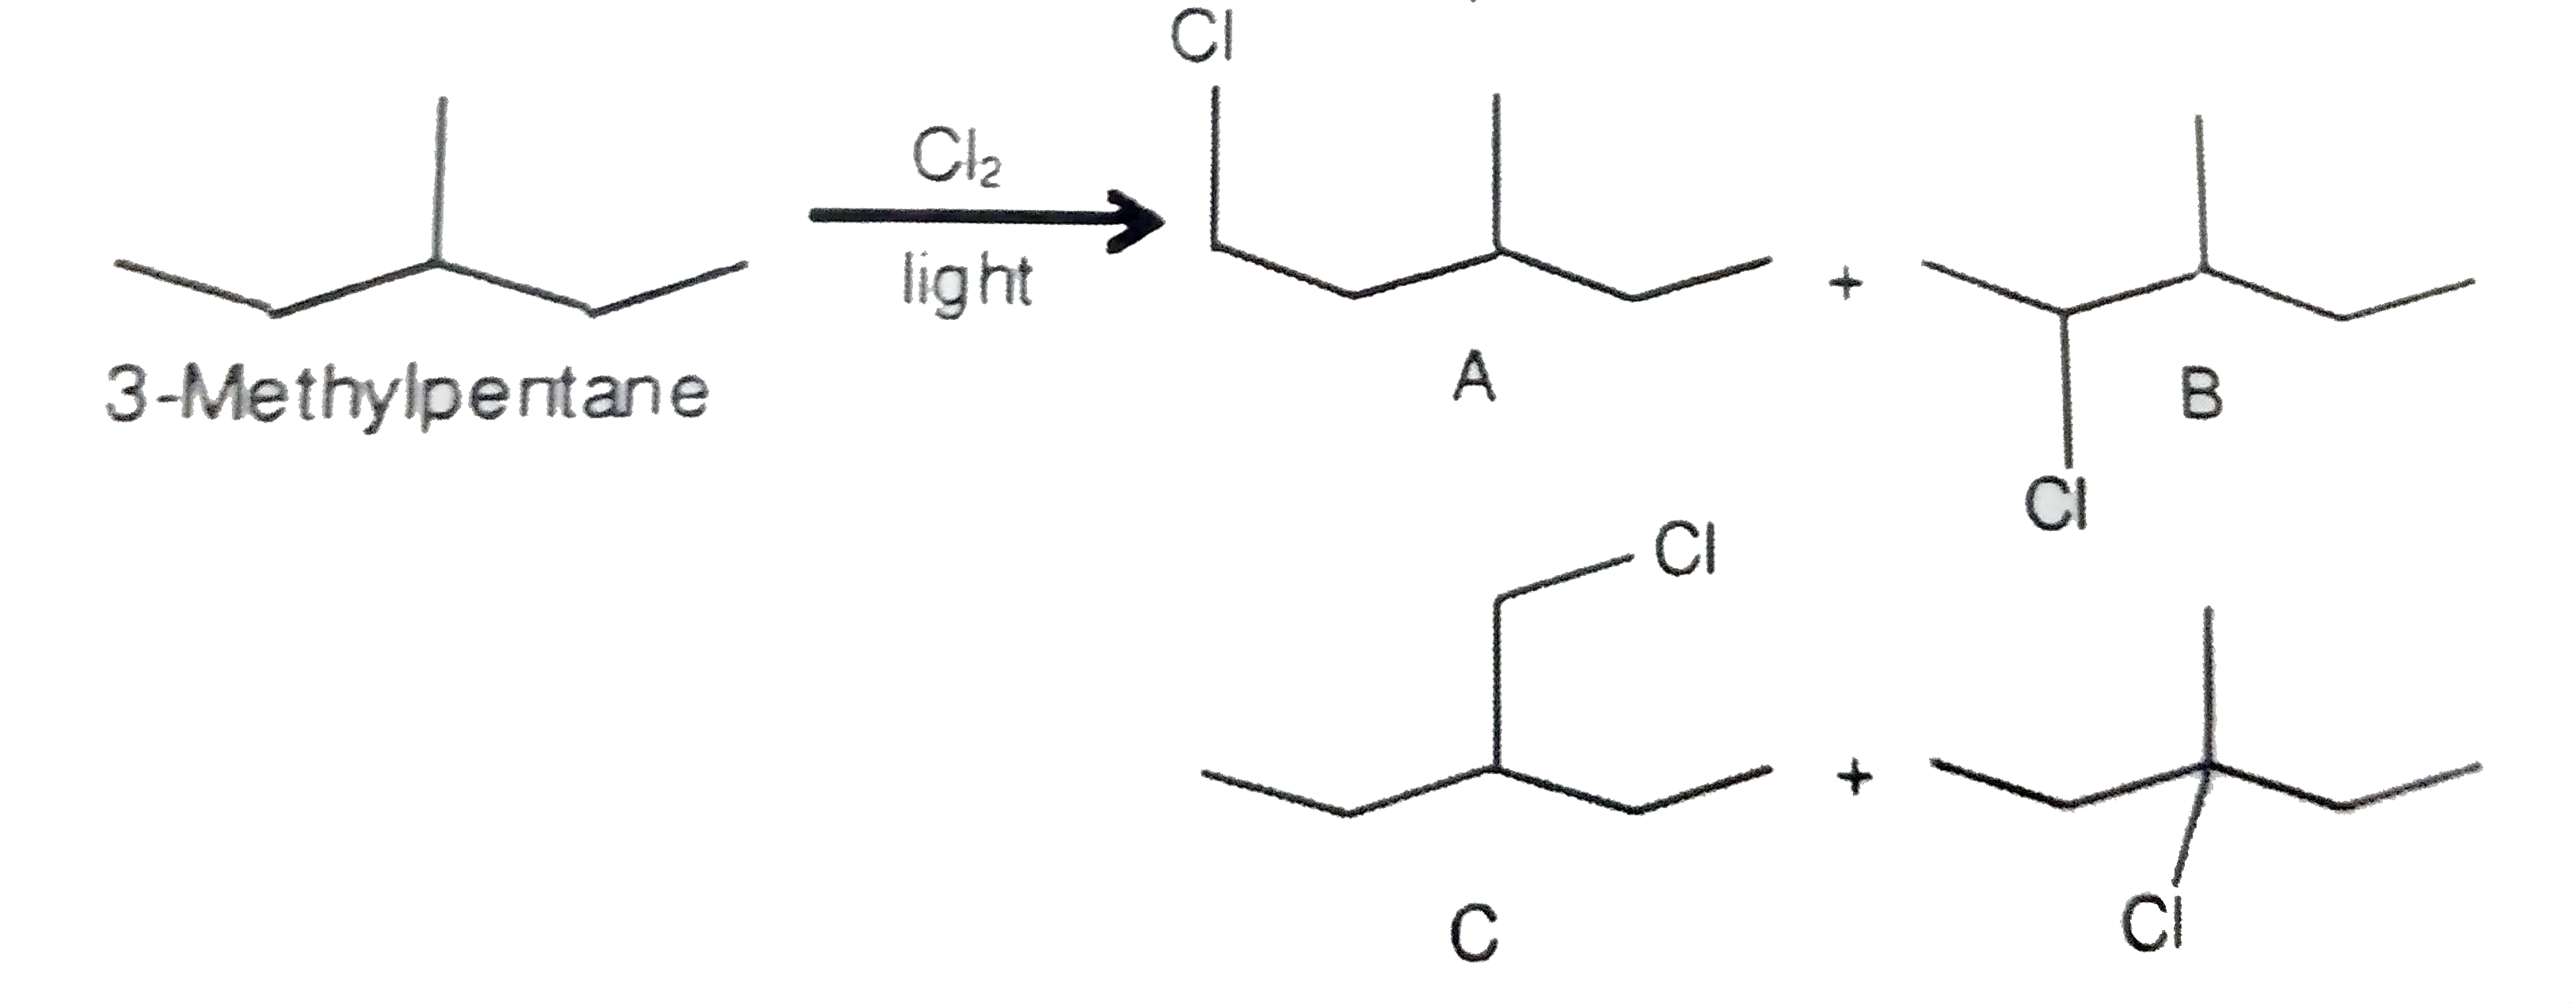 3-Methylpentane on monochlorination gives four possible products. The reaction follows free radical mechanism.The relative reactivities for replacement of -H are 3^(ul@):2^(ul@):1^(ul@) =6:4:1.      Relative amounts of A,B,C and D formed are